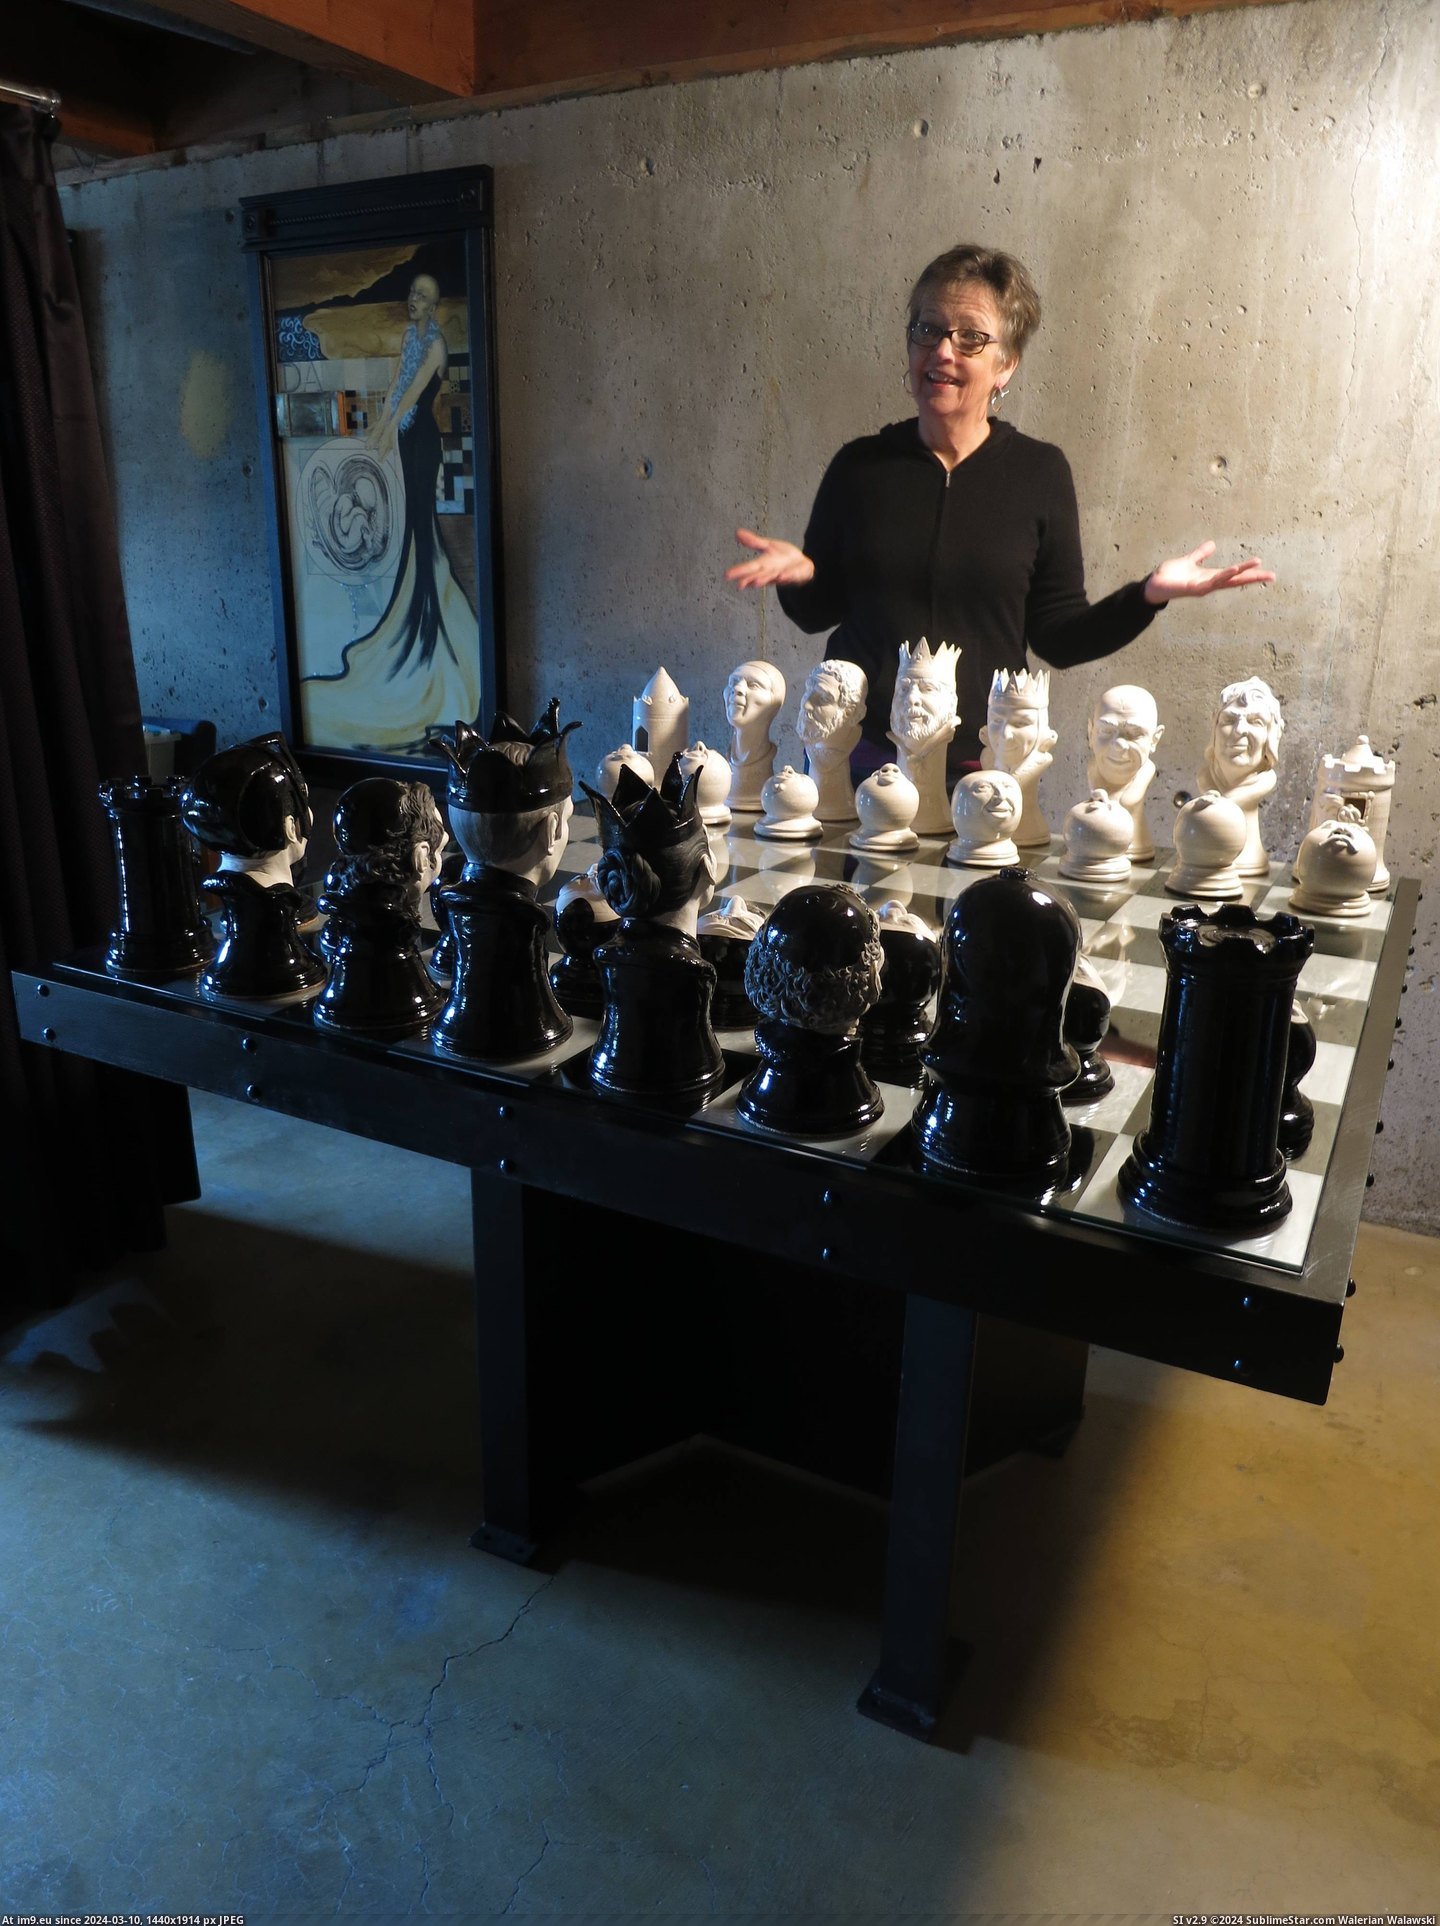 #Share #Thought #Medieval #Chess #Mom #Finished [Pics] My Mom just finished her Medieval Chess Set. Thought I should share. 3 Pic. (Изображение из альбом My r/PICS favs))